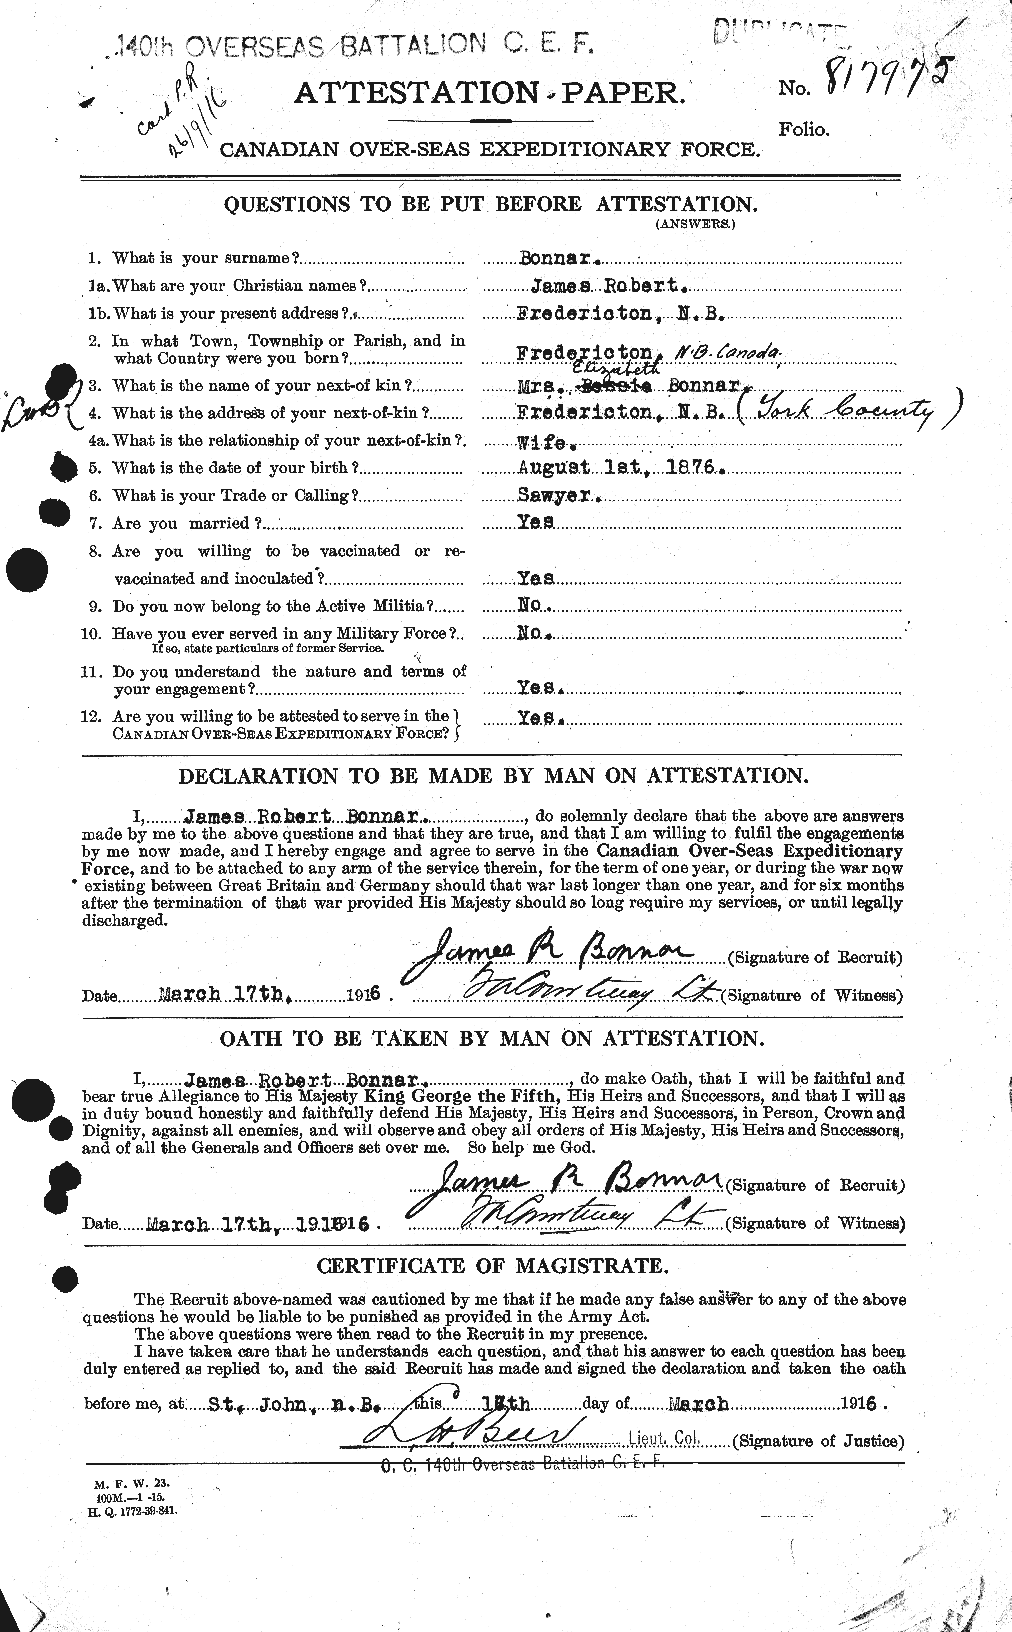 Personnel Records of the First World War - CEF 250705a